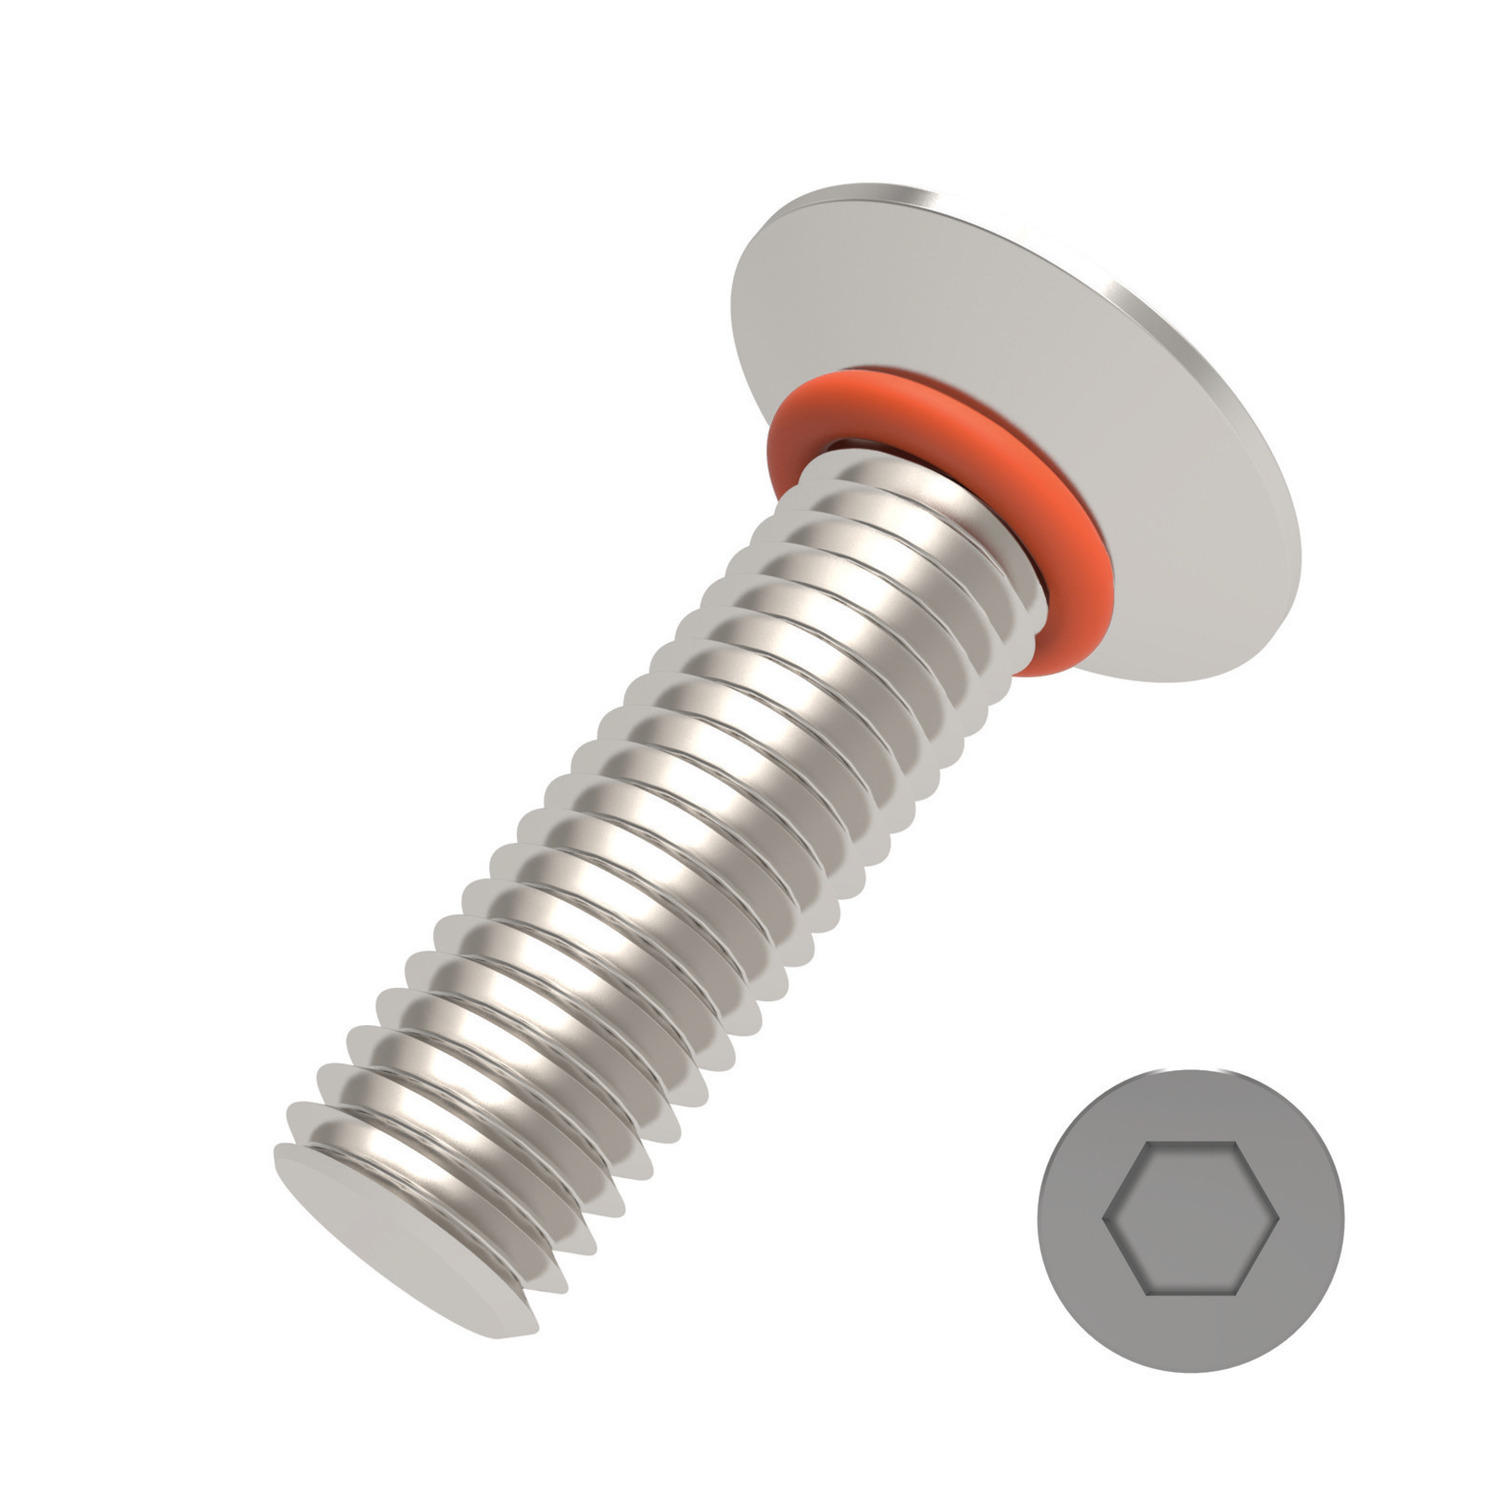 Countersunk Seal Screws Self-sealing screws, countersunk head with integral O ring groove to seal liquids and gases out and in. M3 to M10 A2 or A4 stainless steel.